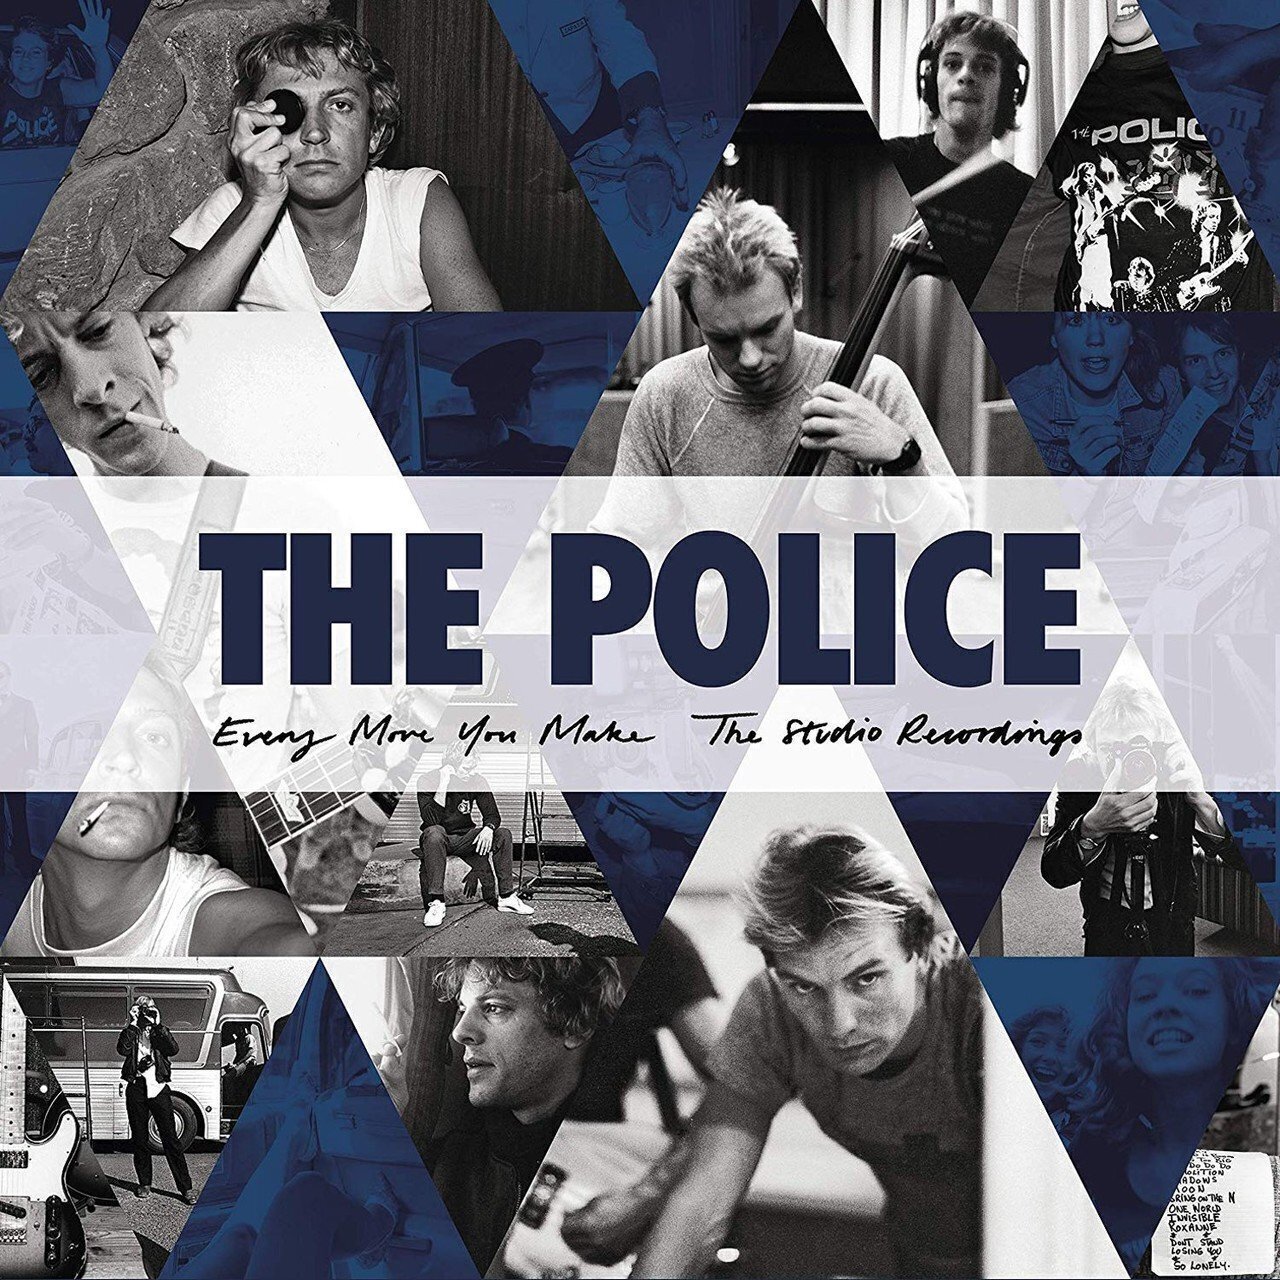 The Police - Every Move You Make: The Studio Recordings (2018) [FLAC 24bit/96kHz]